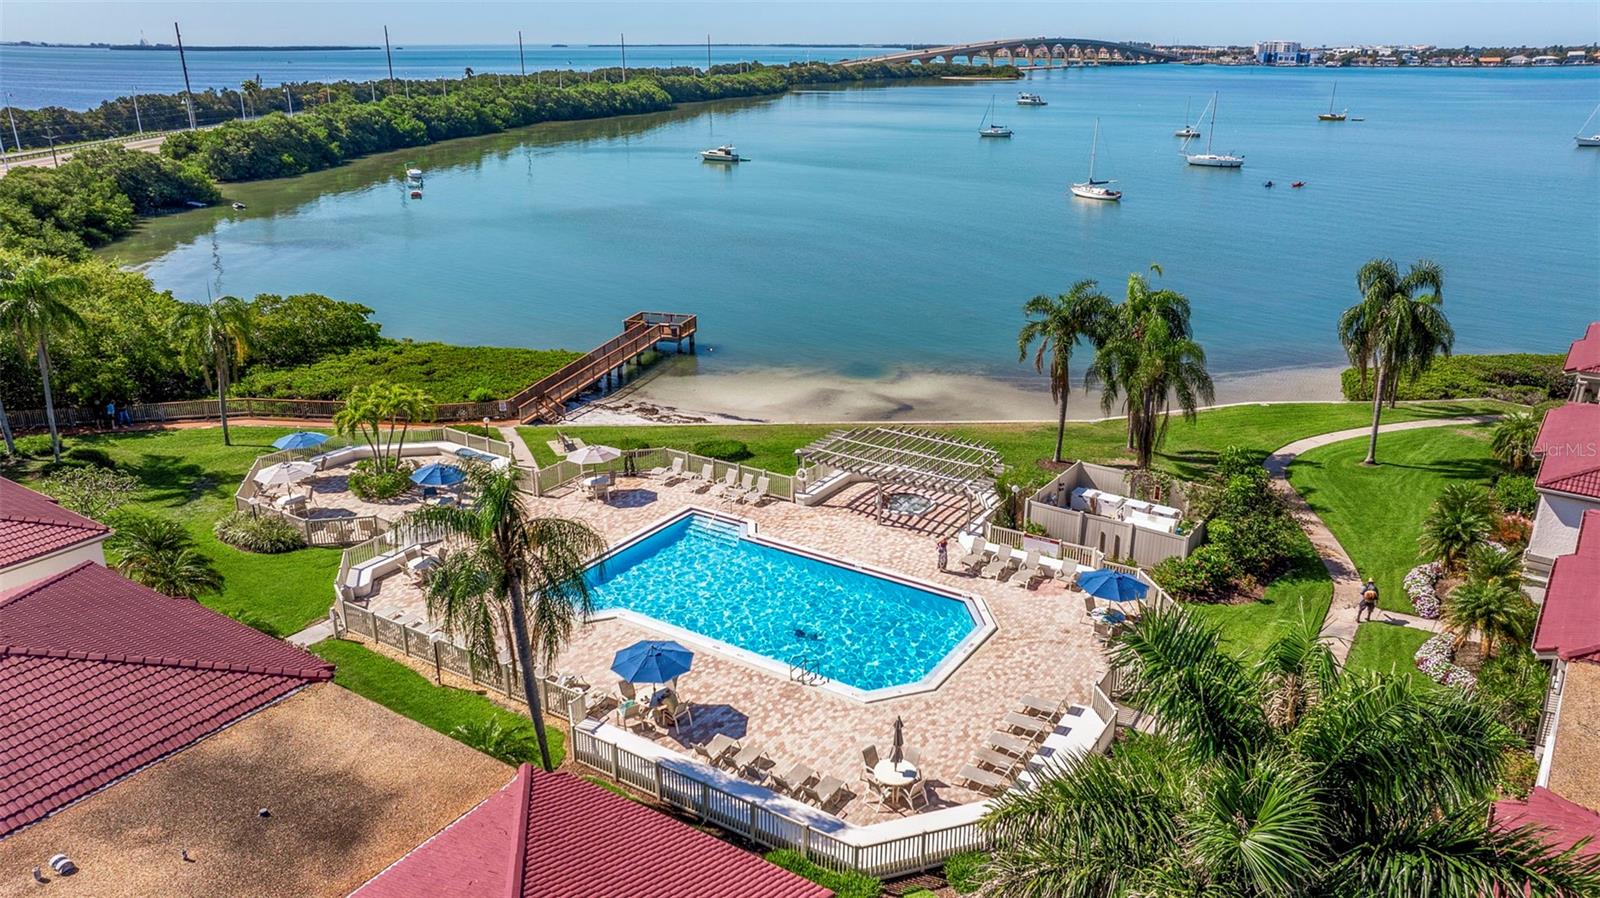 AERIAL VIEW OF THE BRIDGE TO TIERRA VERDE AND BATS MOORED ON THE BOCA CIEGA BAY. noTE THE TAMPA BAY ON THE OTHER SIDE OF THE ROAD LEADING TO TIERRA VERDE. WALK FROM YOUR CONDO OVER THE BRIDGE TO TIERRA VERDE ON A PEDESTRIAN WALKWAY.